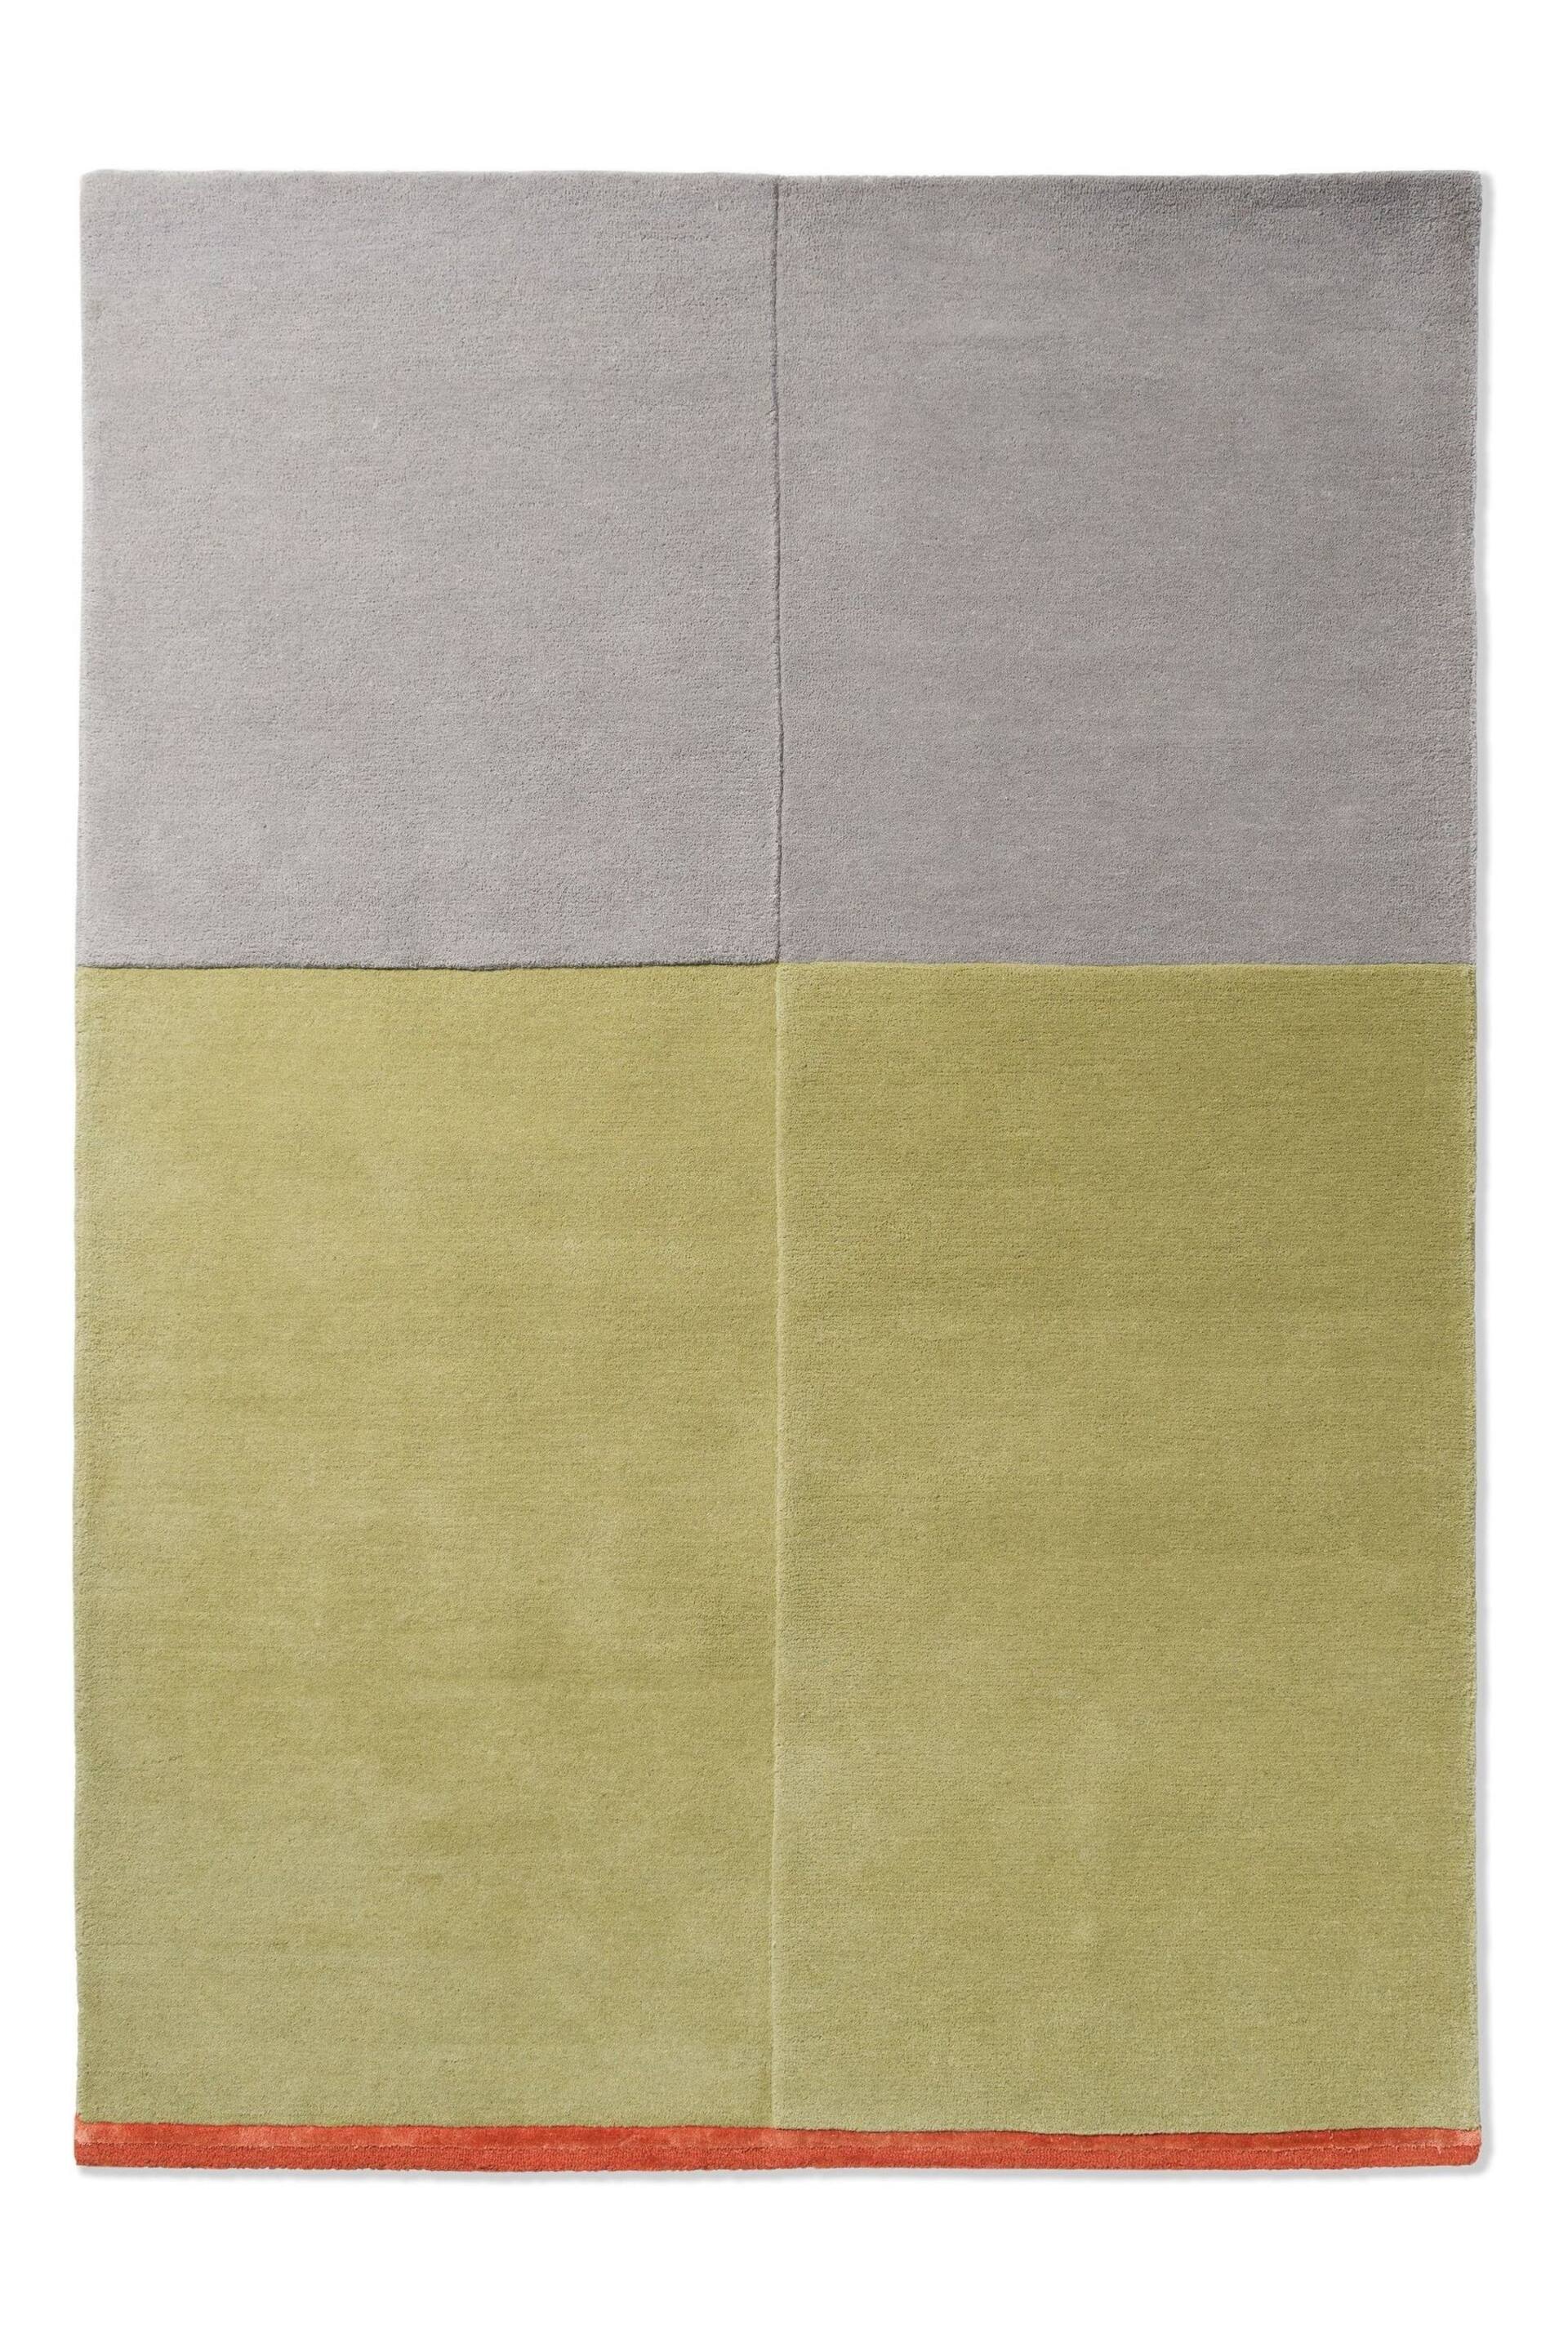 Brink & Campman Green Decor State Rug - Image 1 of 4